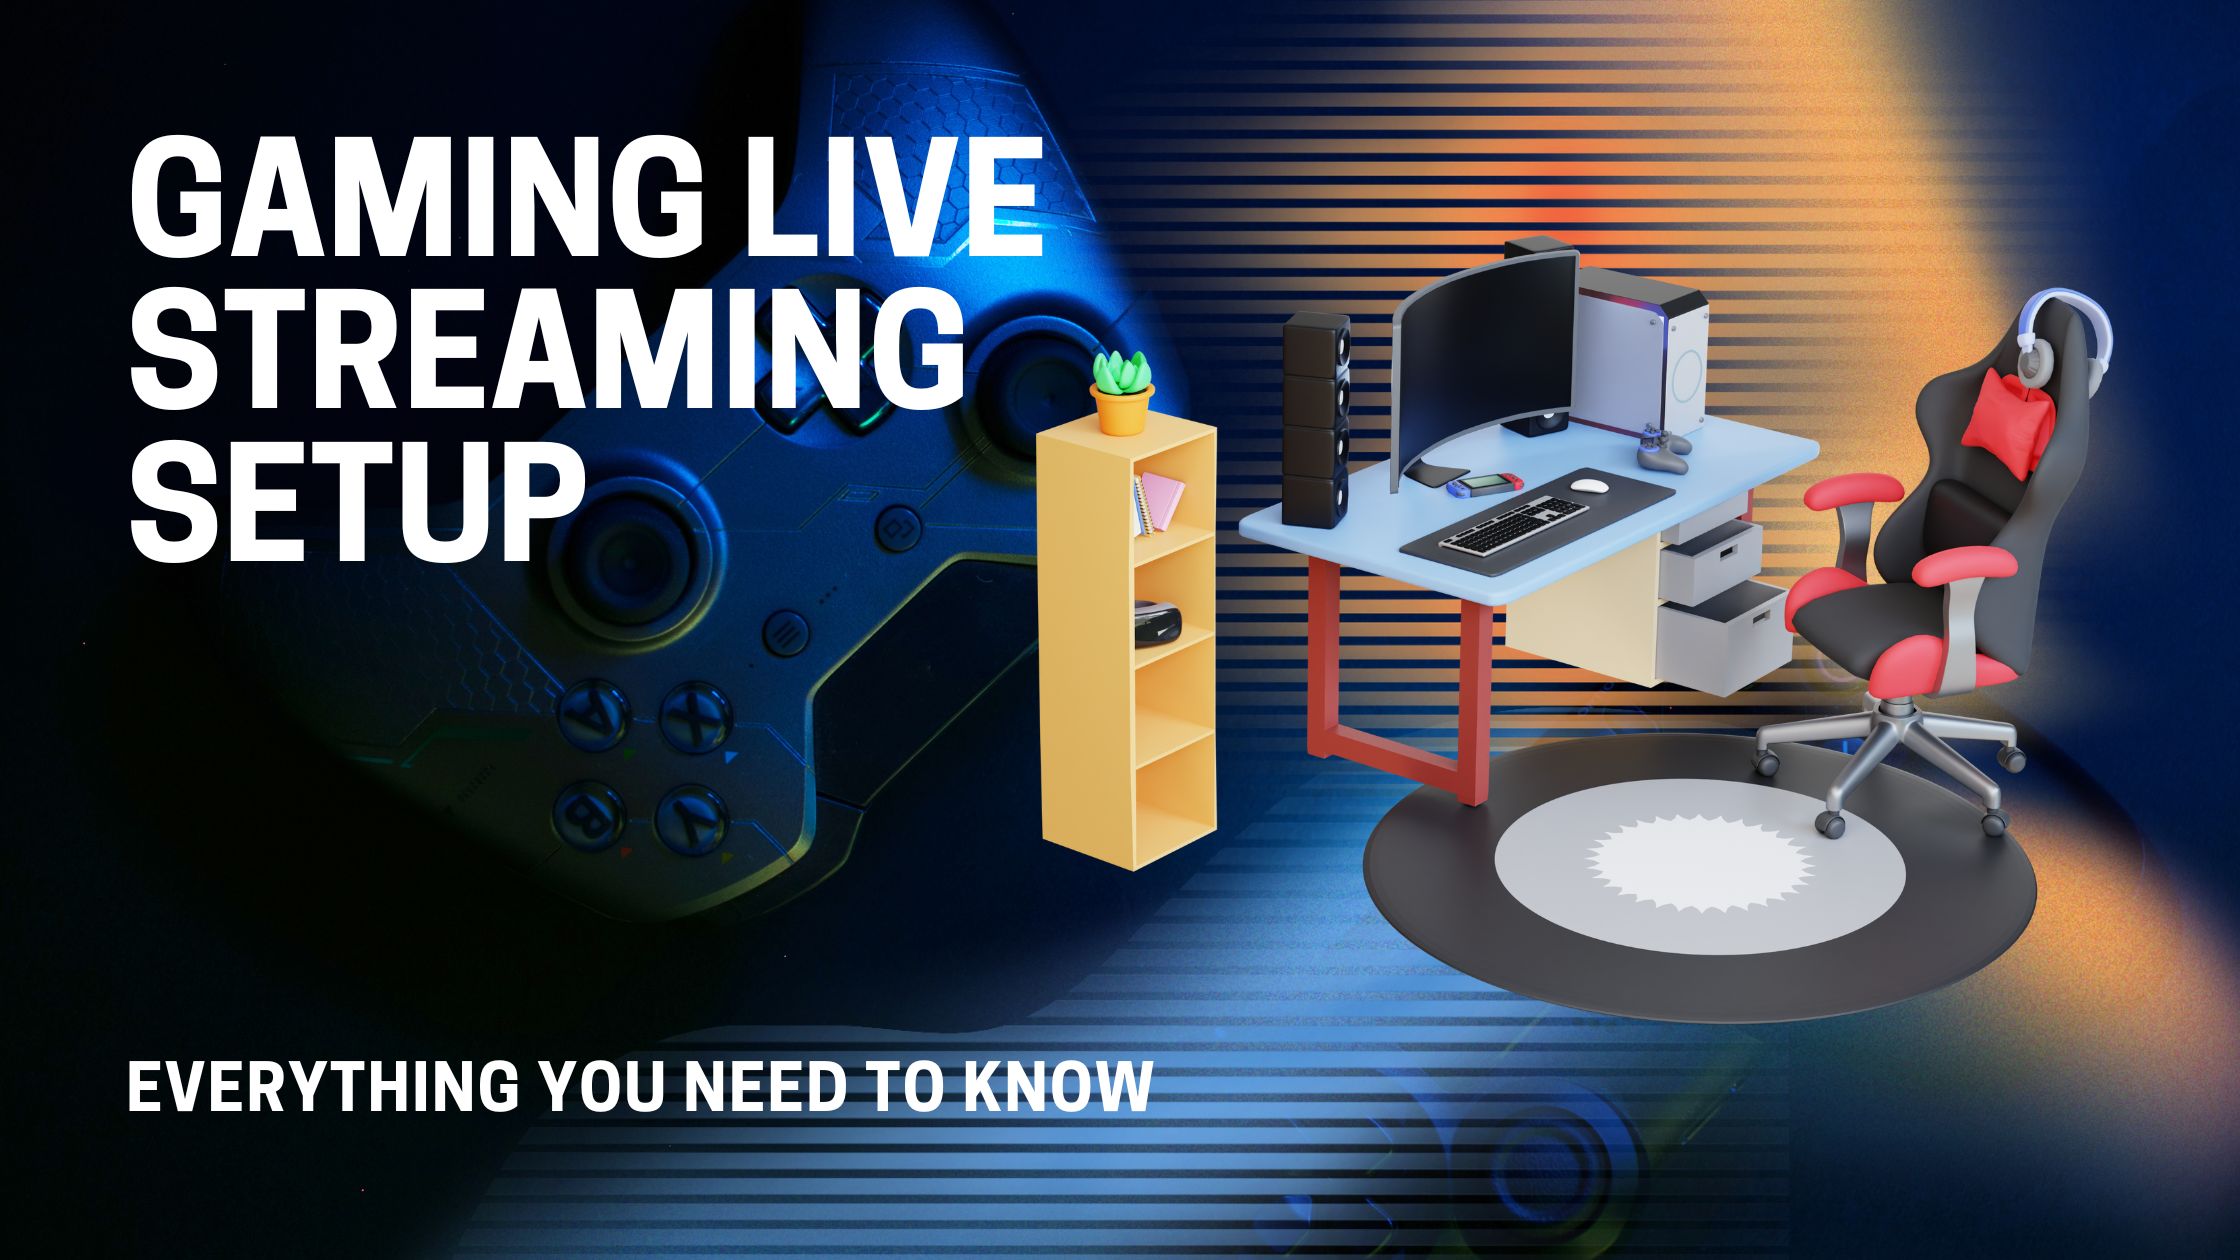 Gaming Live Streaming Setup Everything You Need to Know